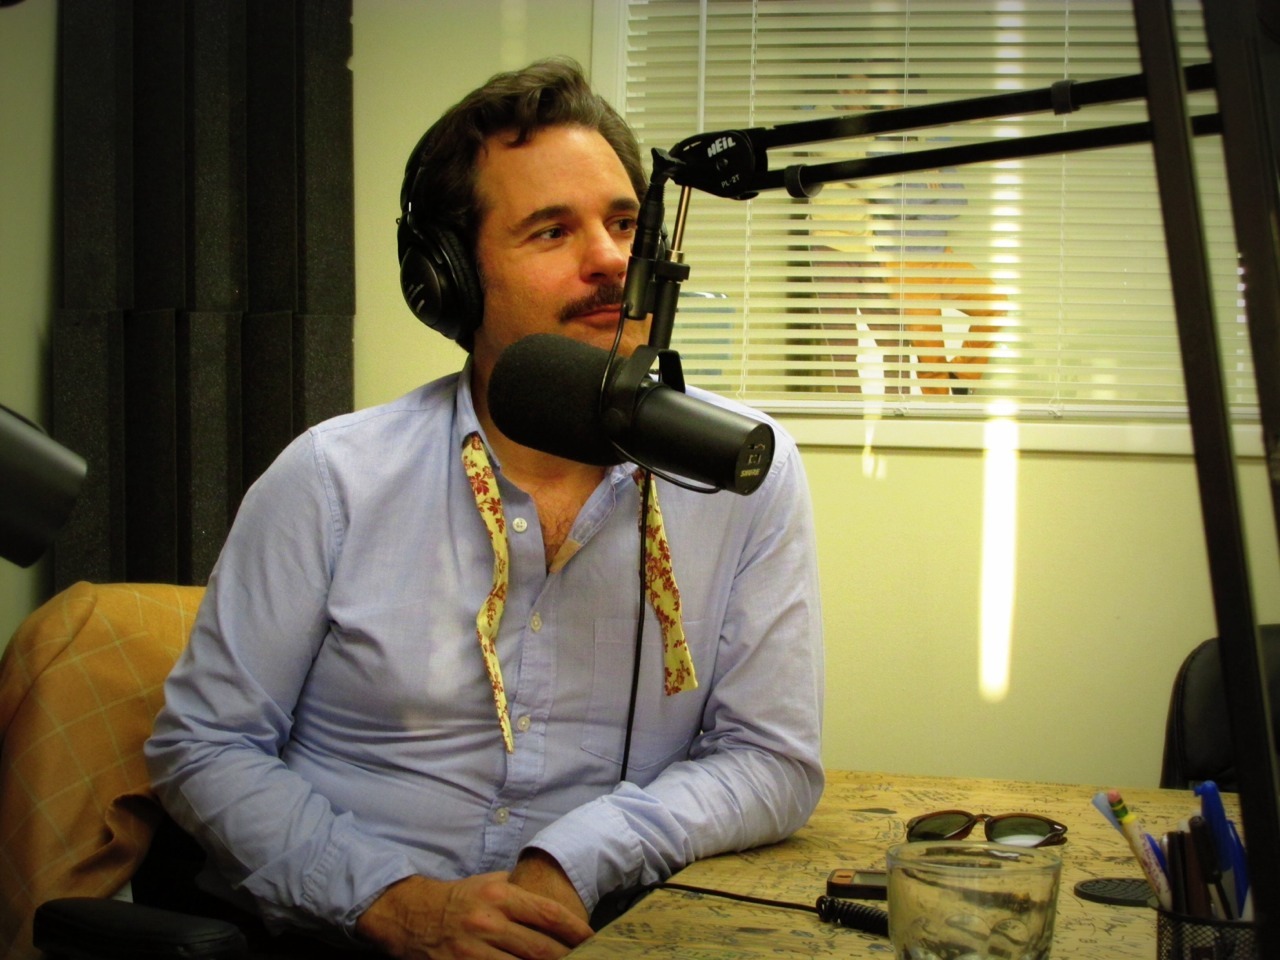 Paul F. Tompkins with an untied bowtie laughing and sitting at a microphone